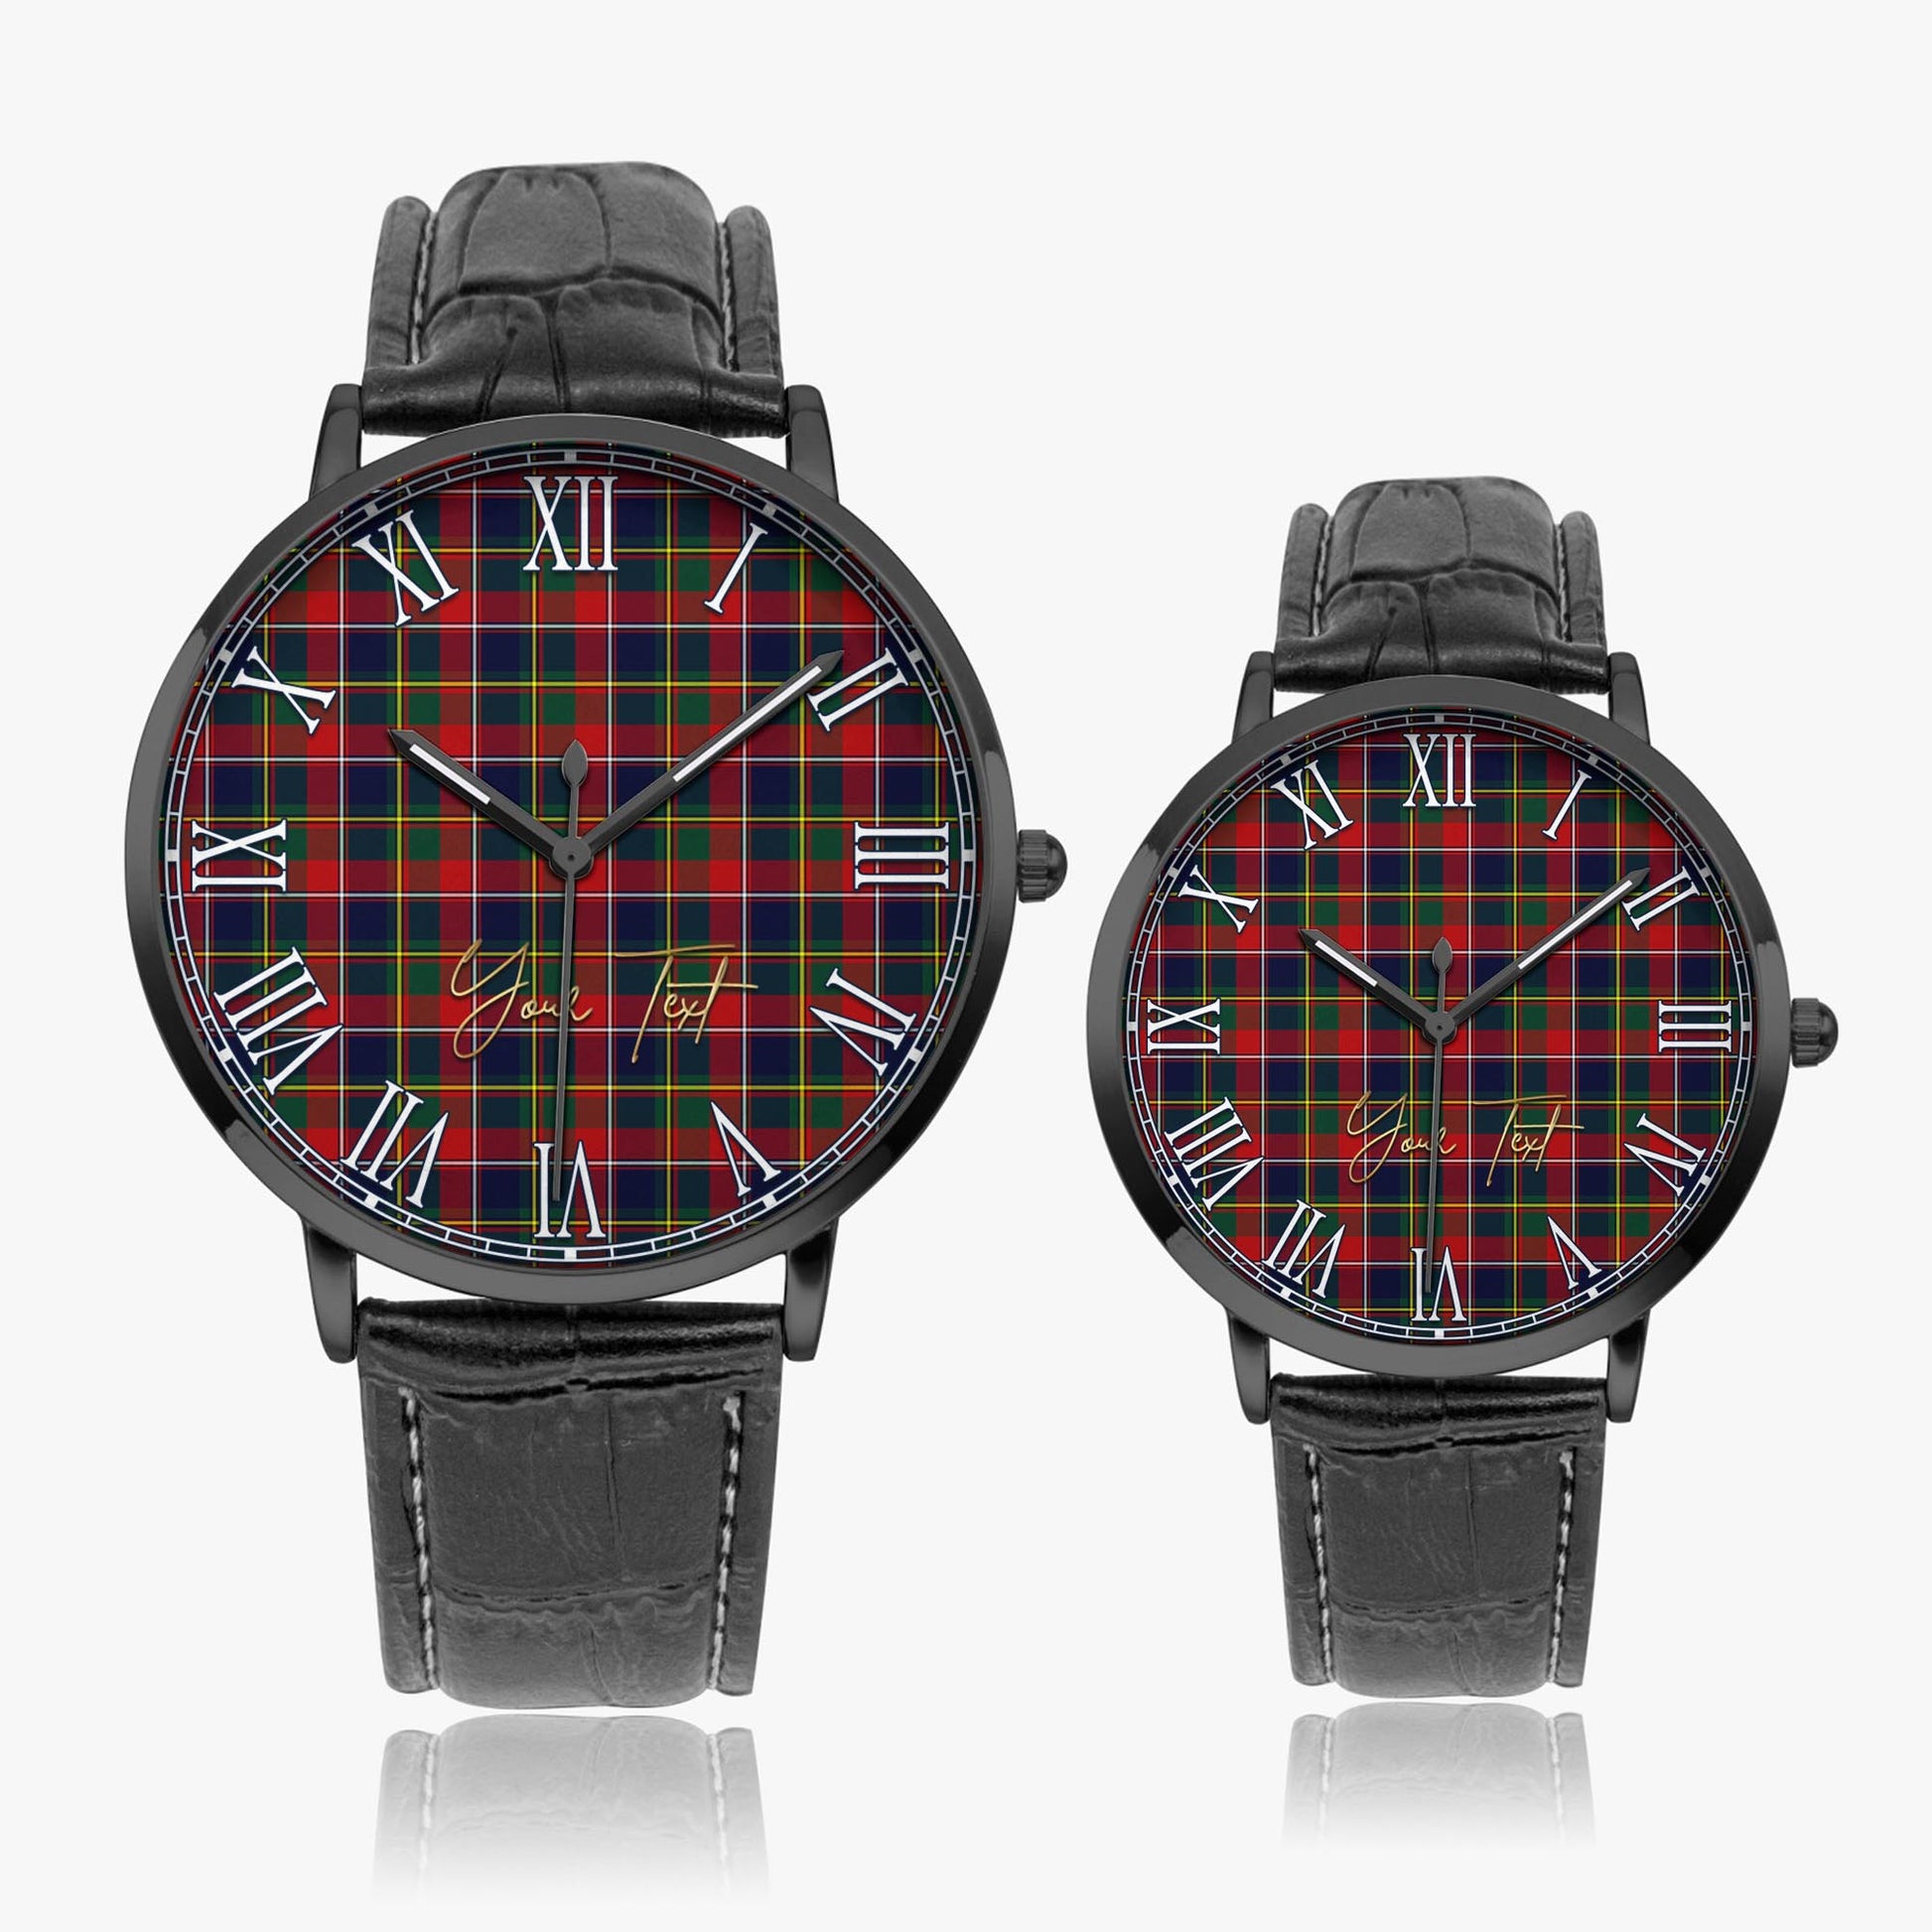 Quebec Province Canada Tartan Personalized Your Text Leather Trap Quartz Watch Ultra Thin Black Case With Black Leather Strap - Tartanvibesclothing